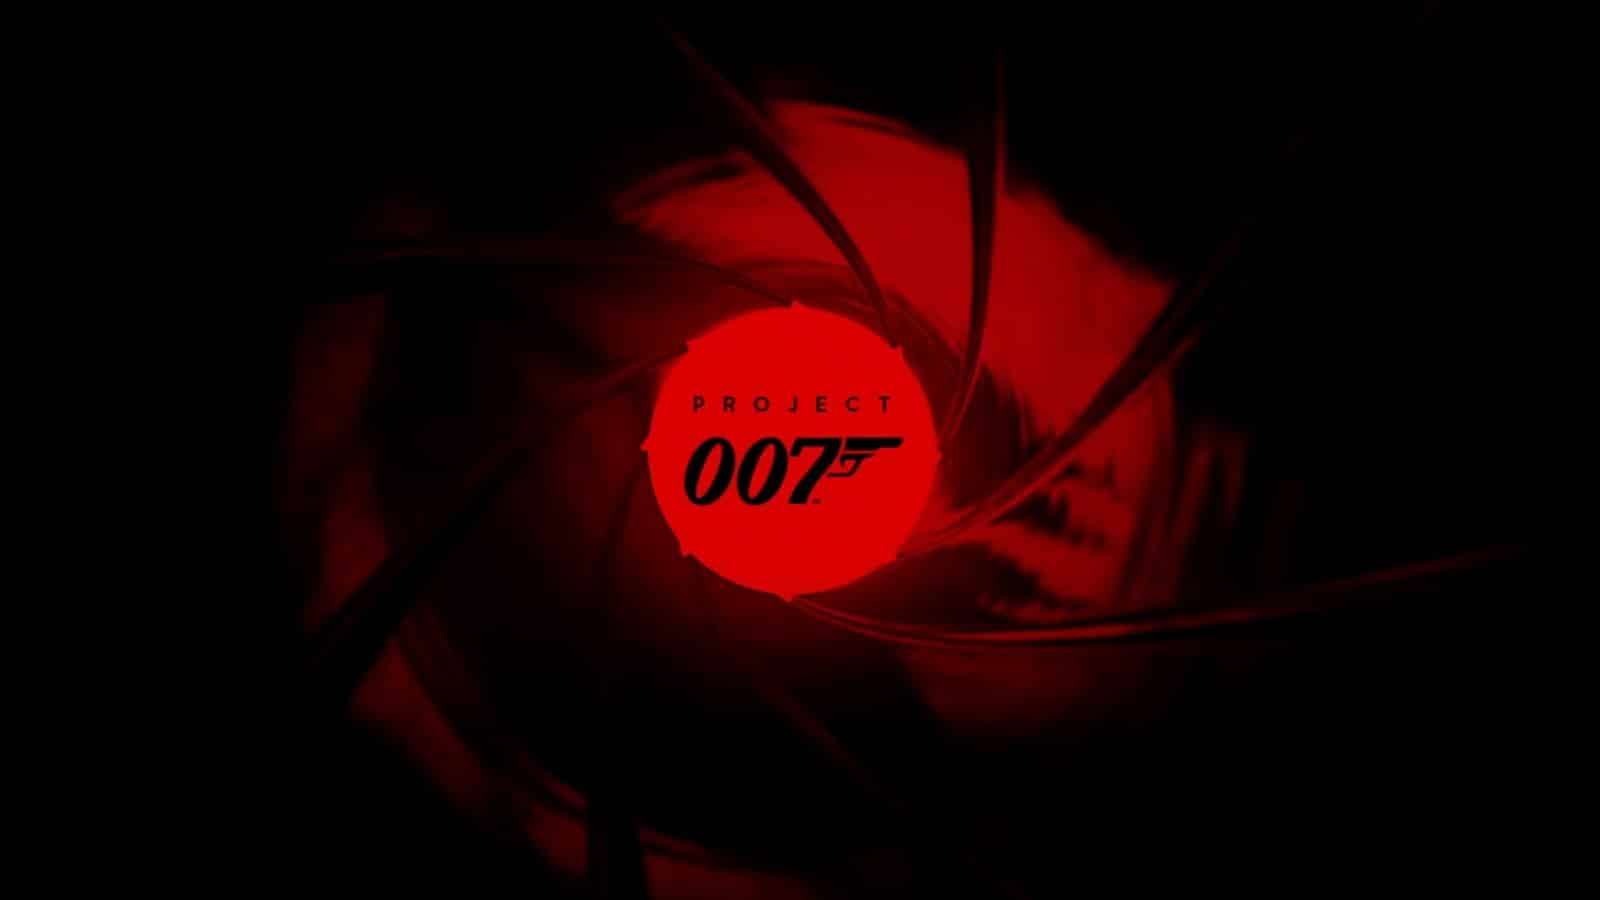 project 007 james bond game release window